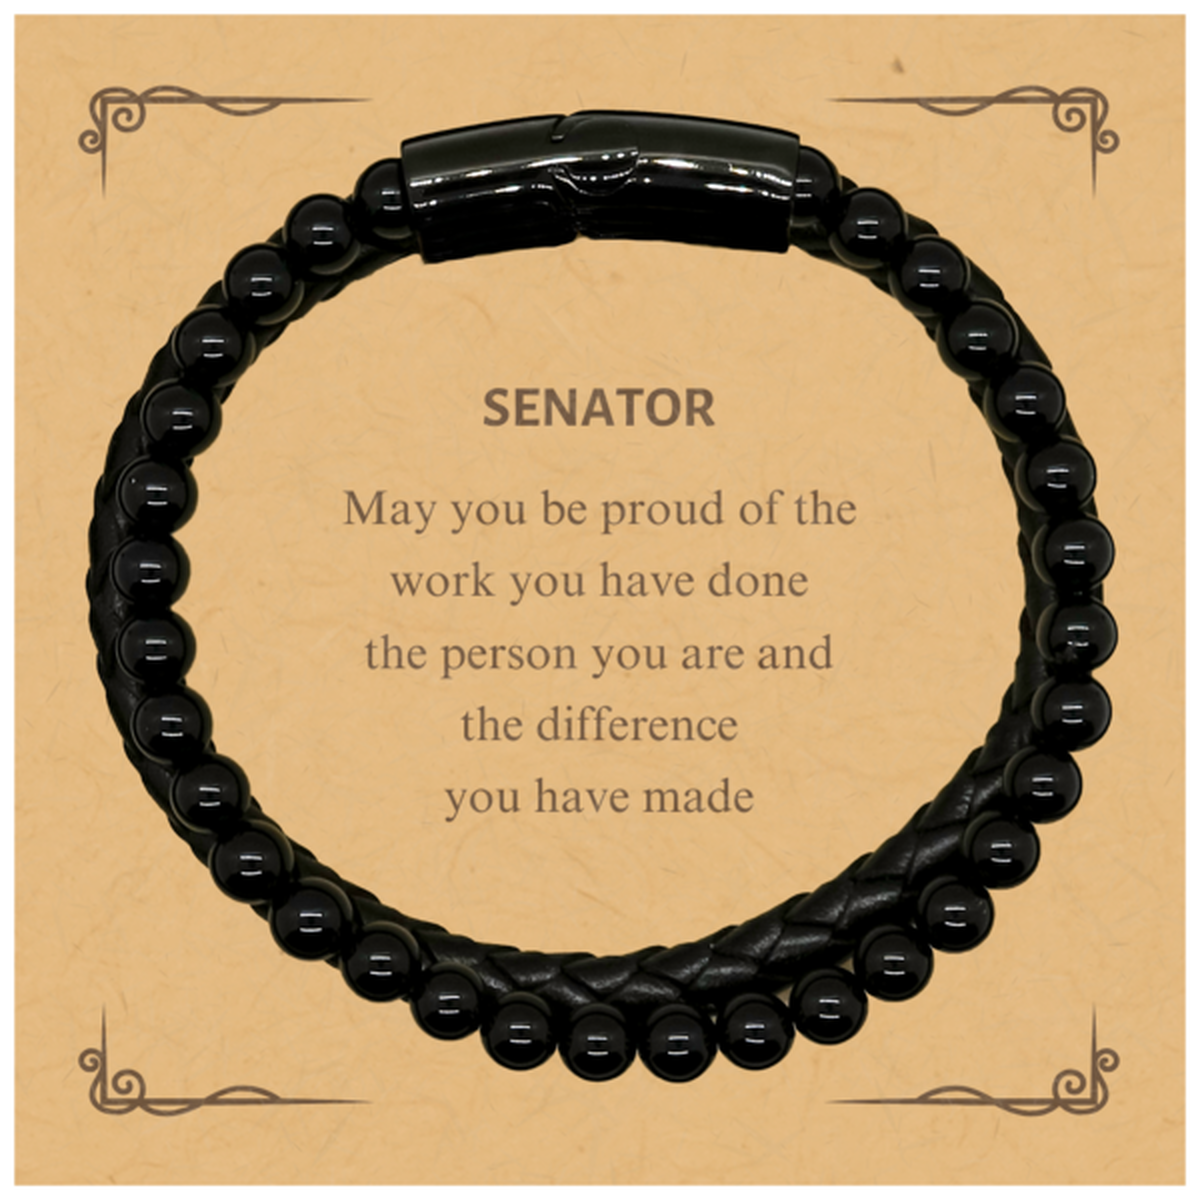 Senator May you be proud of the work you have done, Retirement Senator Stone Leather Bracelets for Colleague Appreciation Gifts Amazing for Senator